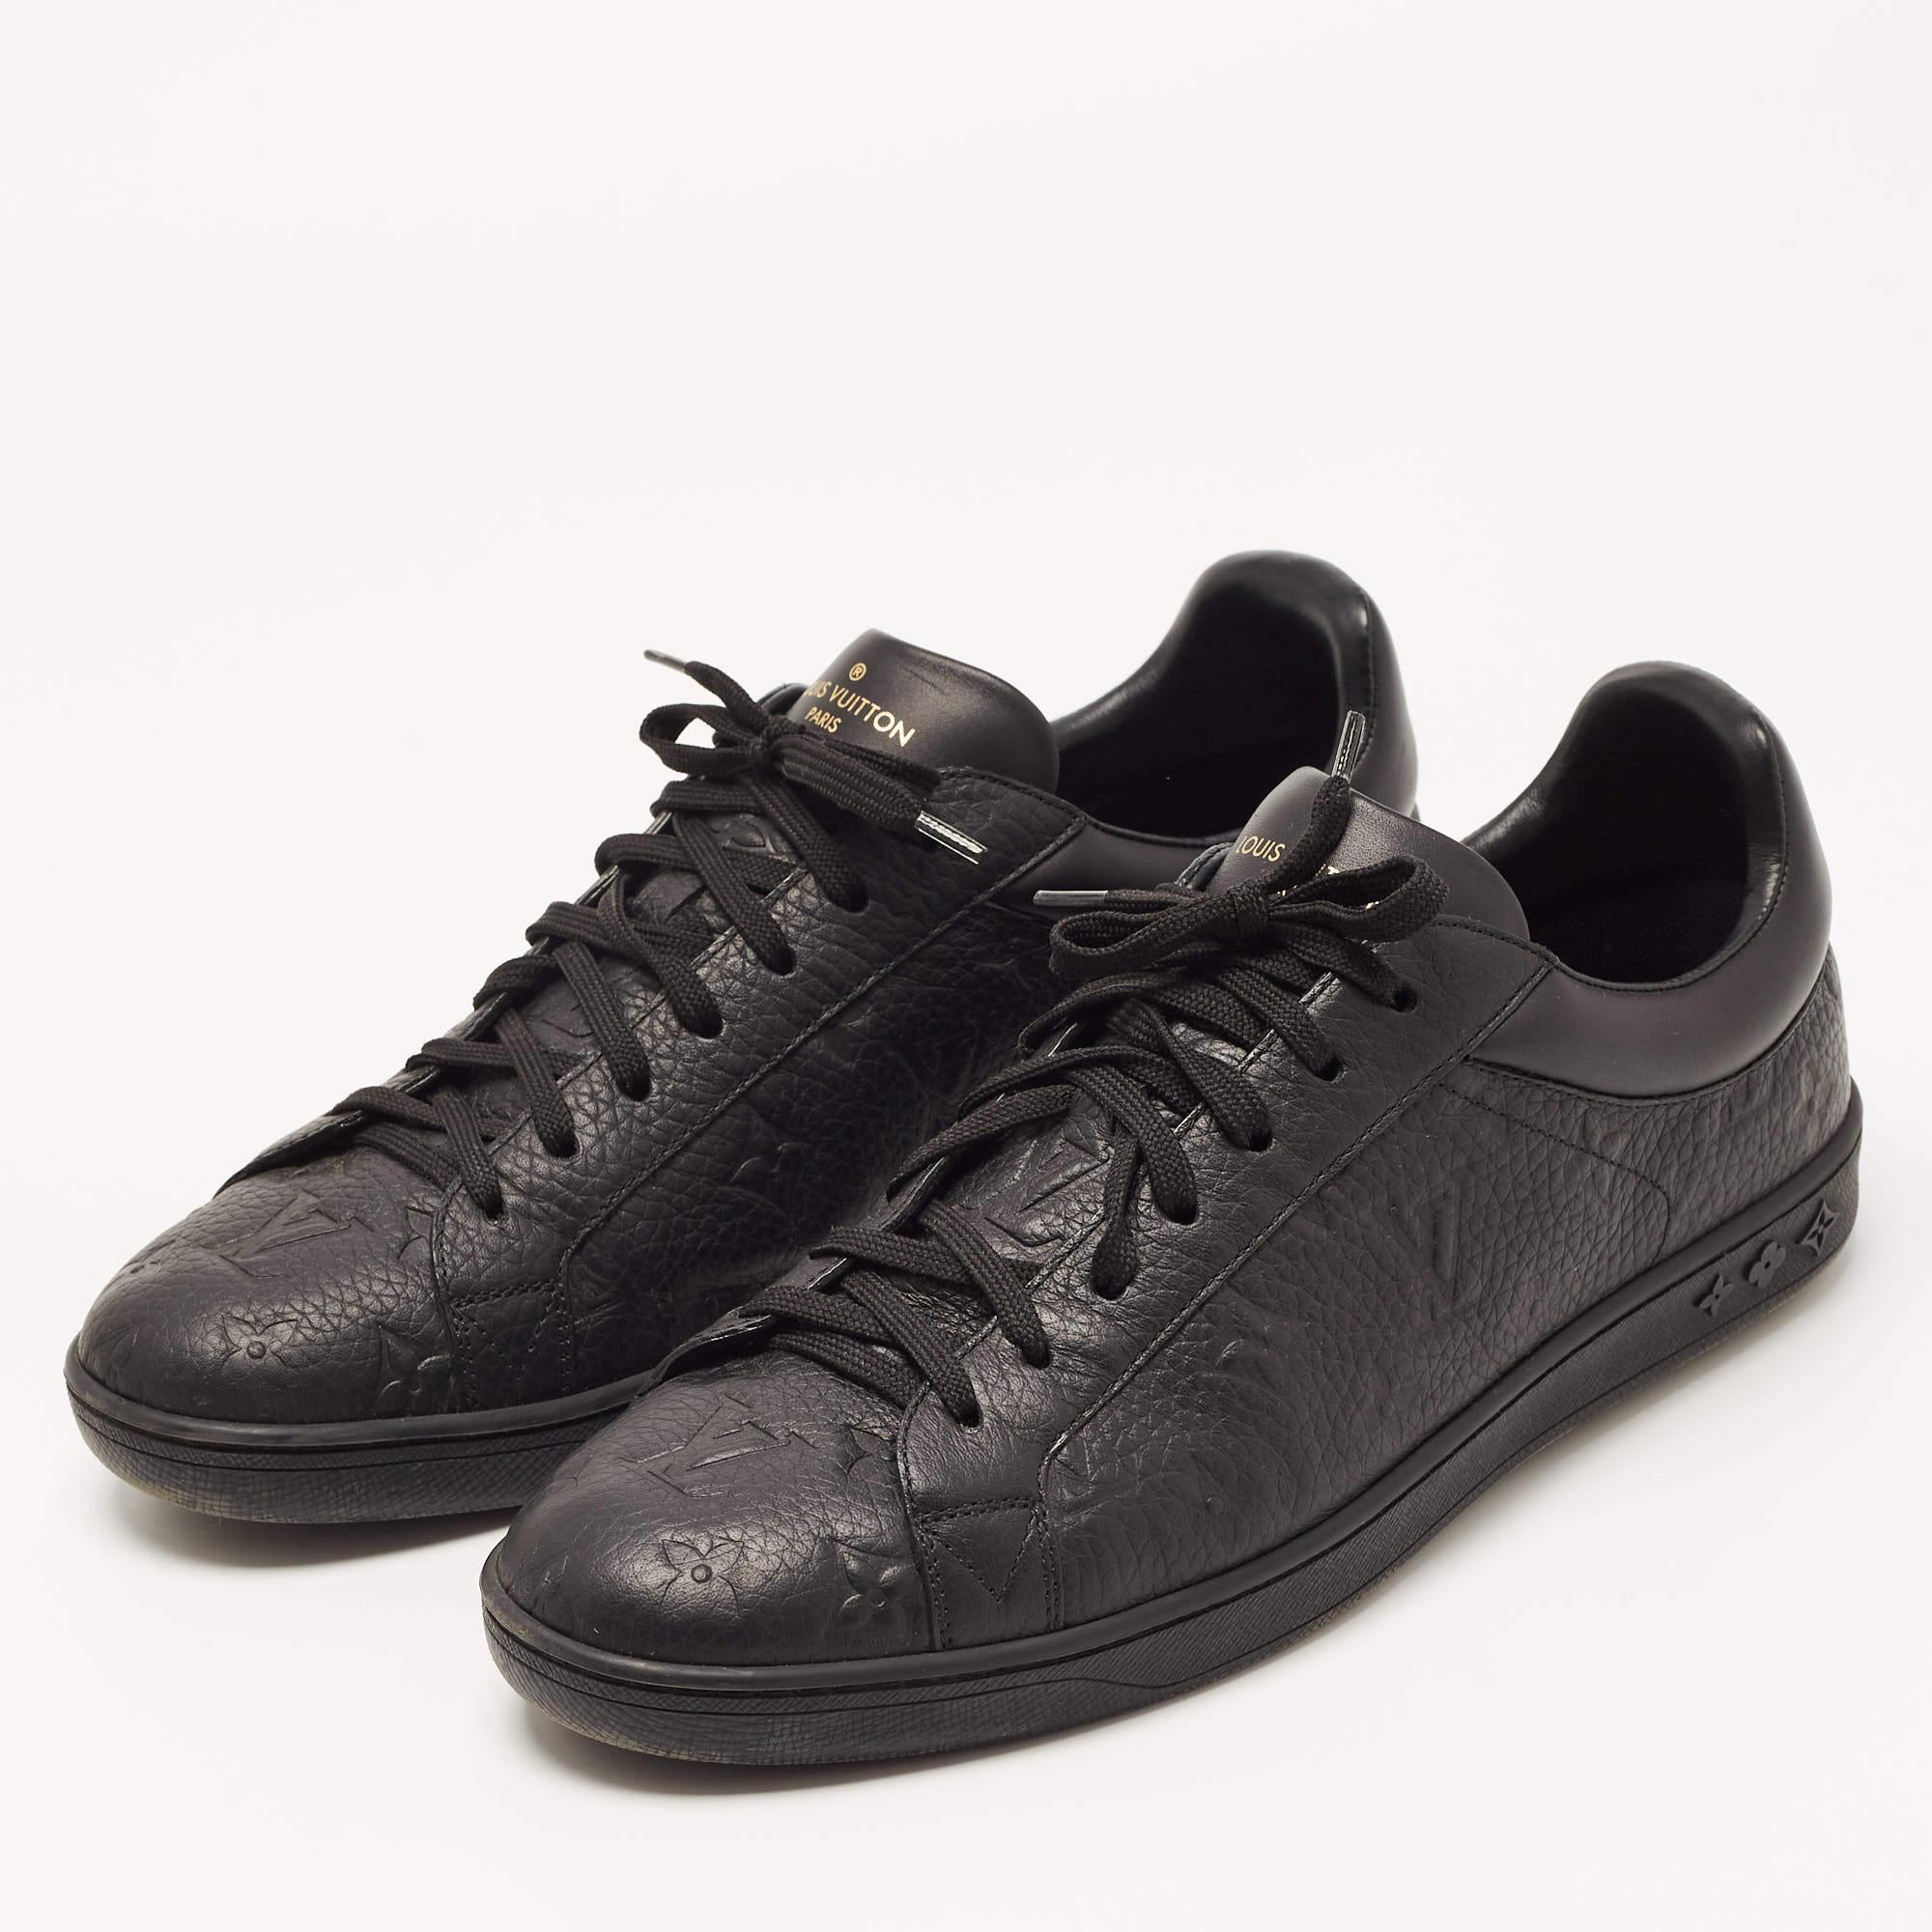 Louis Vuitton Black Monogram Leather Luxembourg Sneakers Size 43 5